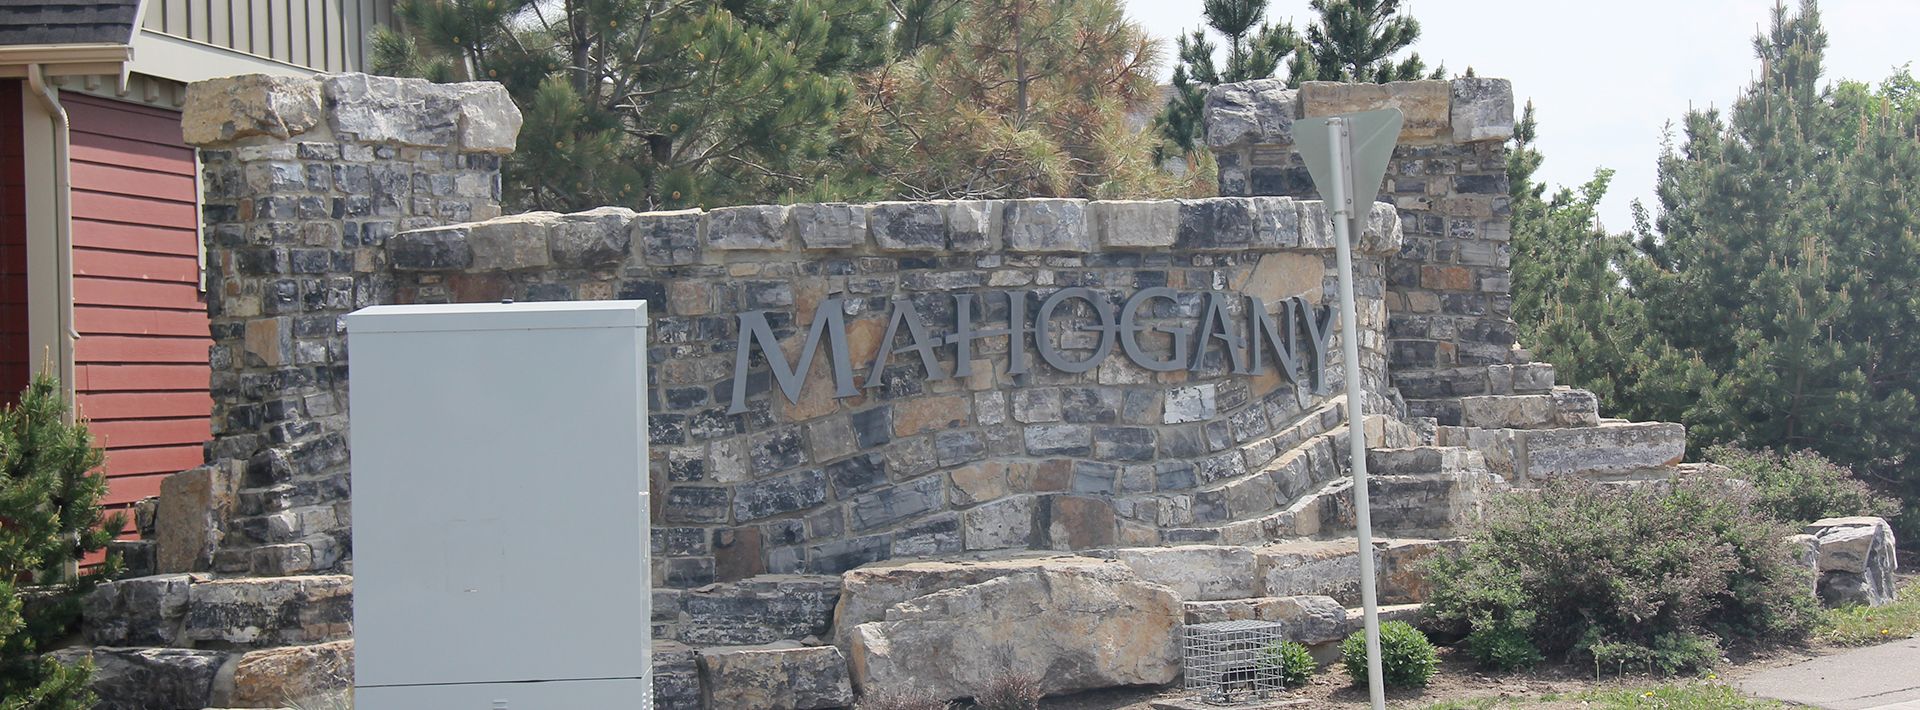 A stone wall with the word Mahogany written on it